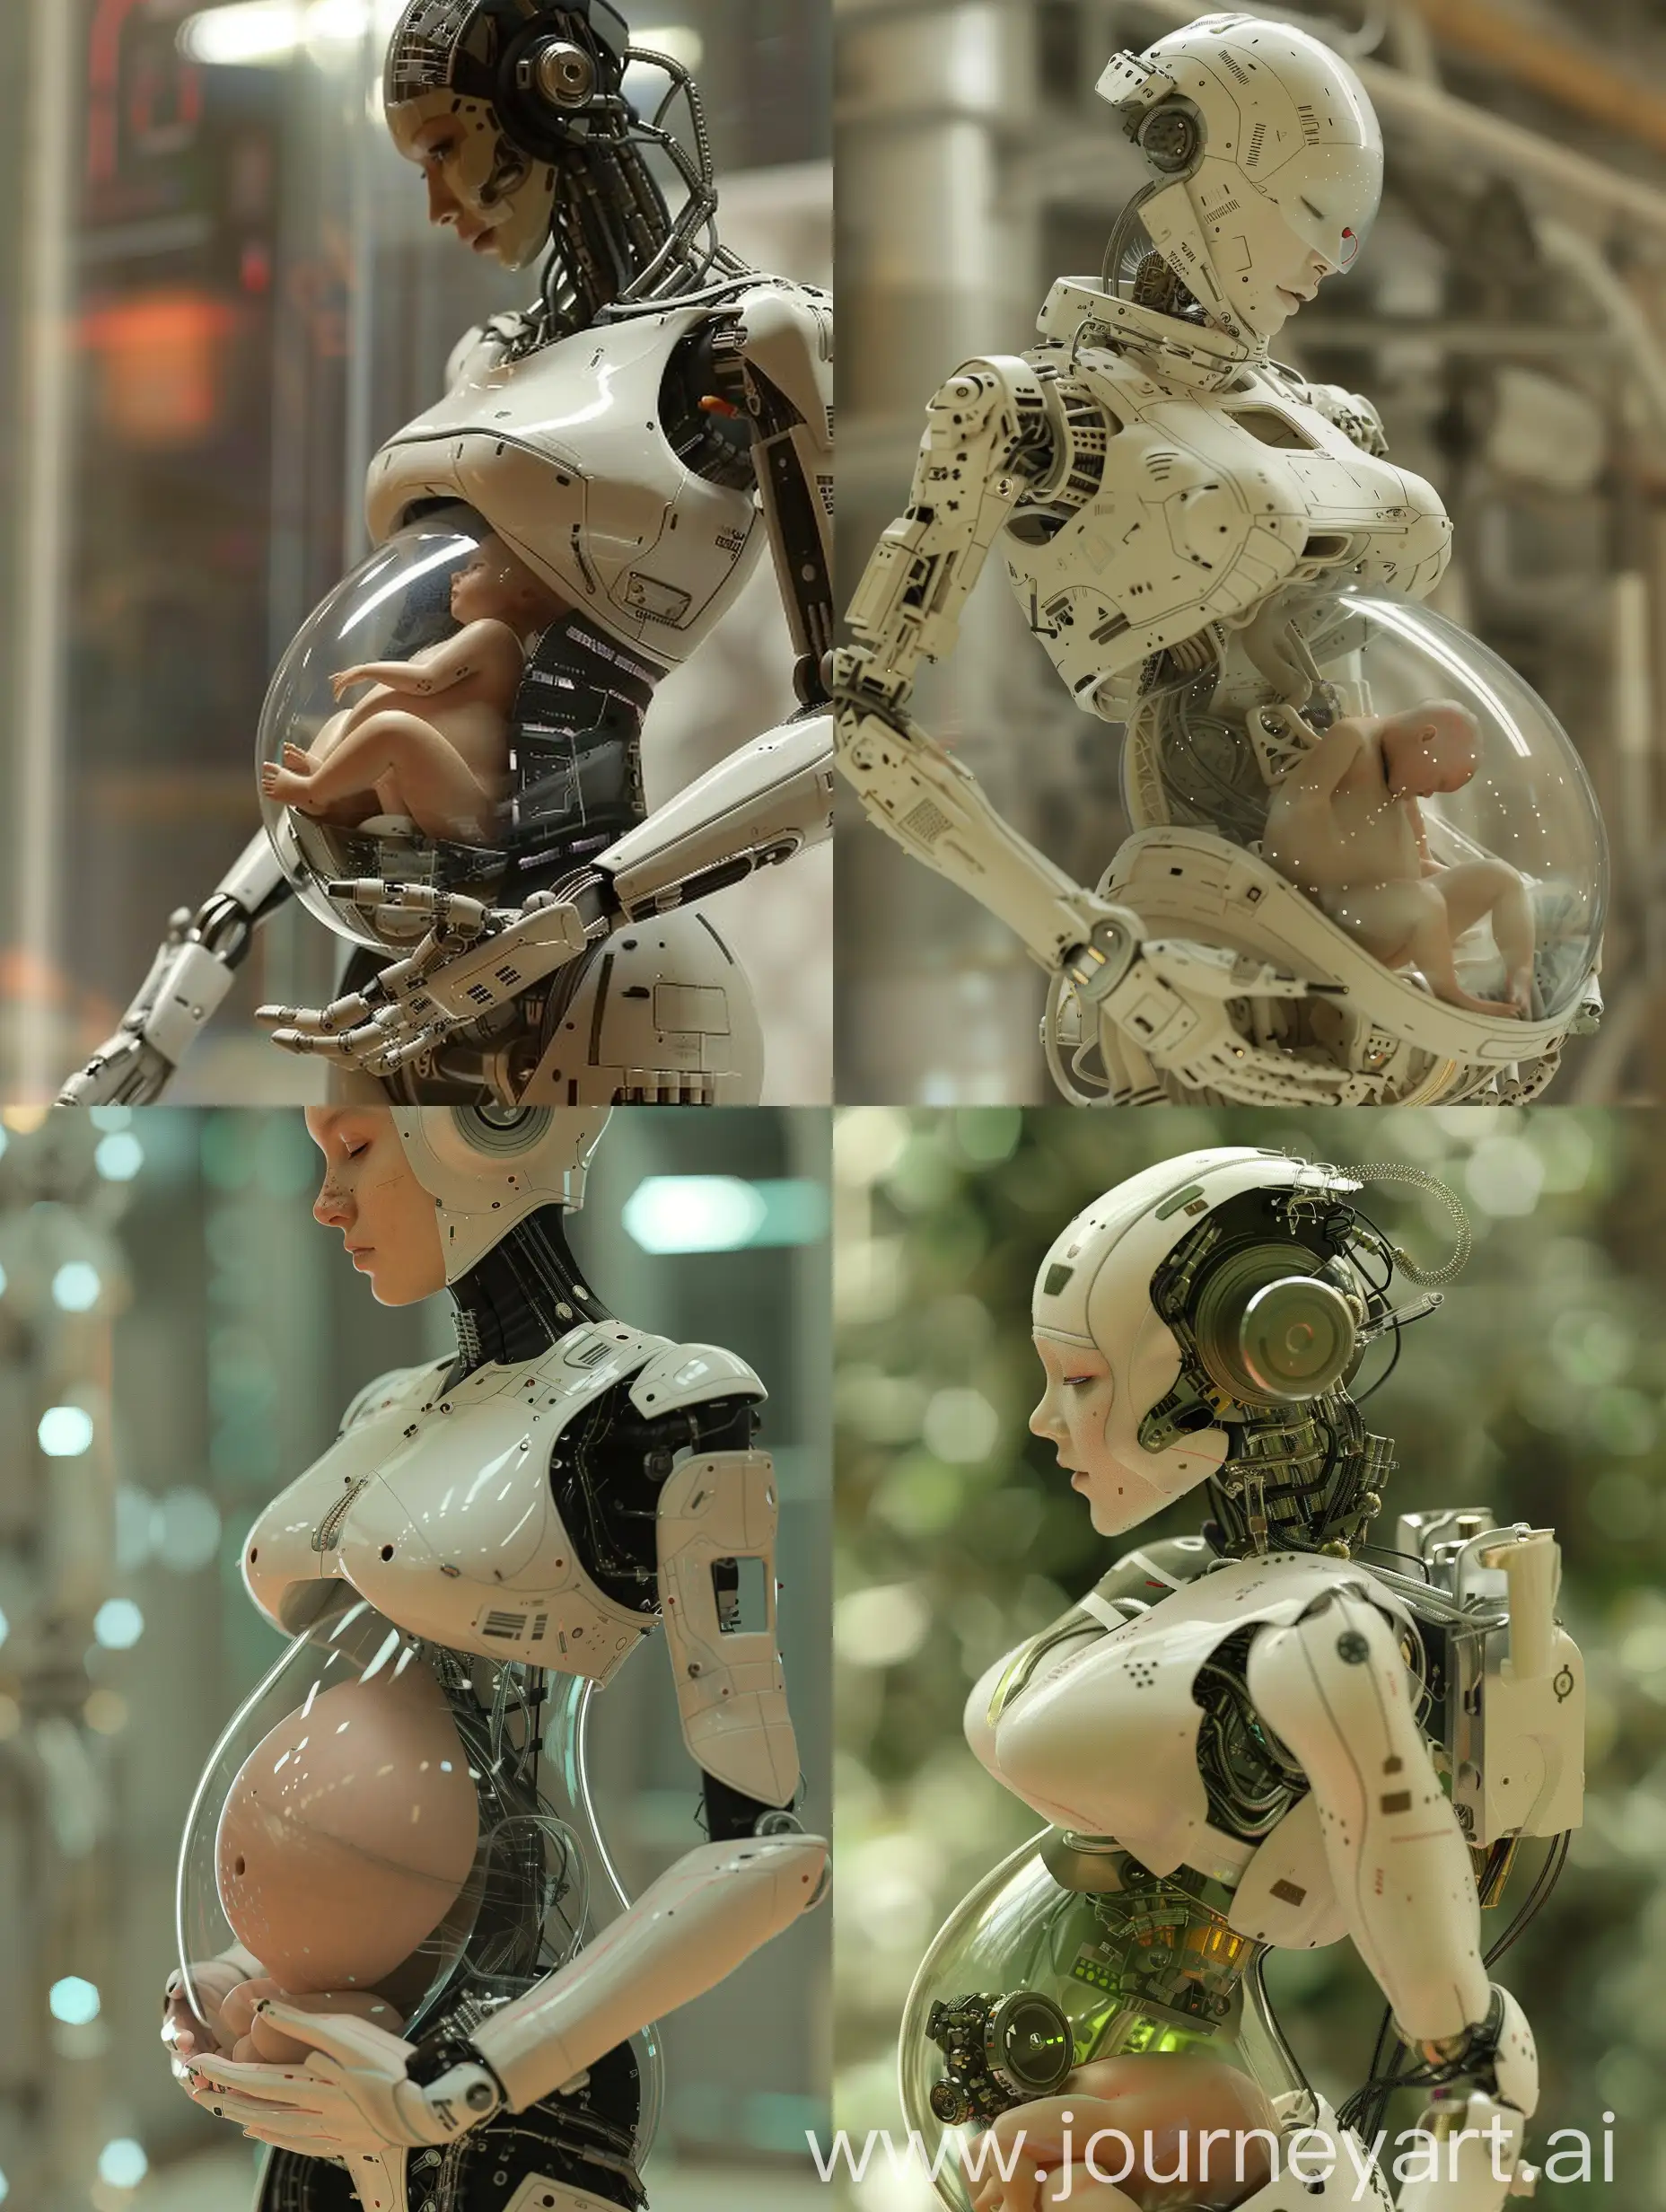 a pregnant android with a translucent belly you can see the baby inside her. Very intricate